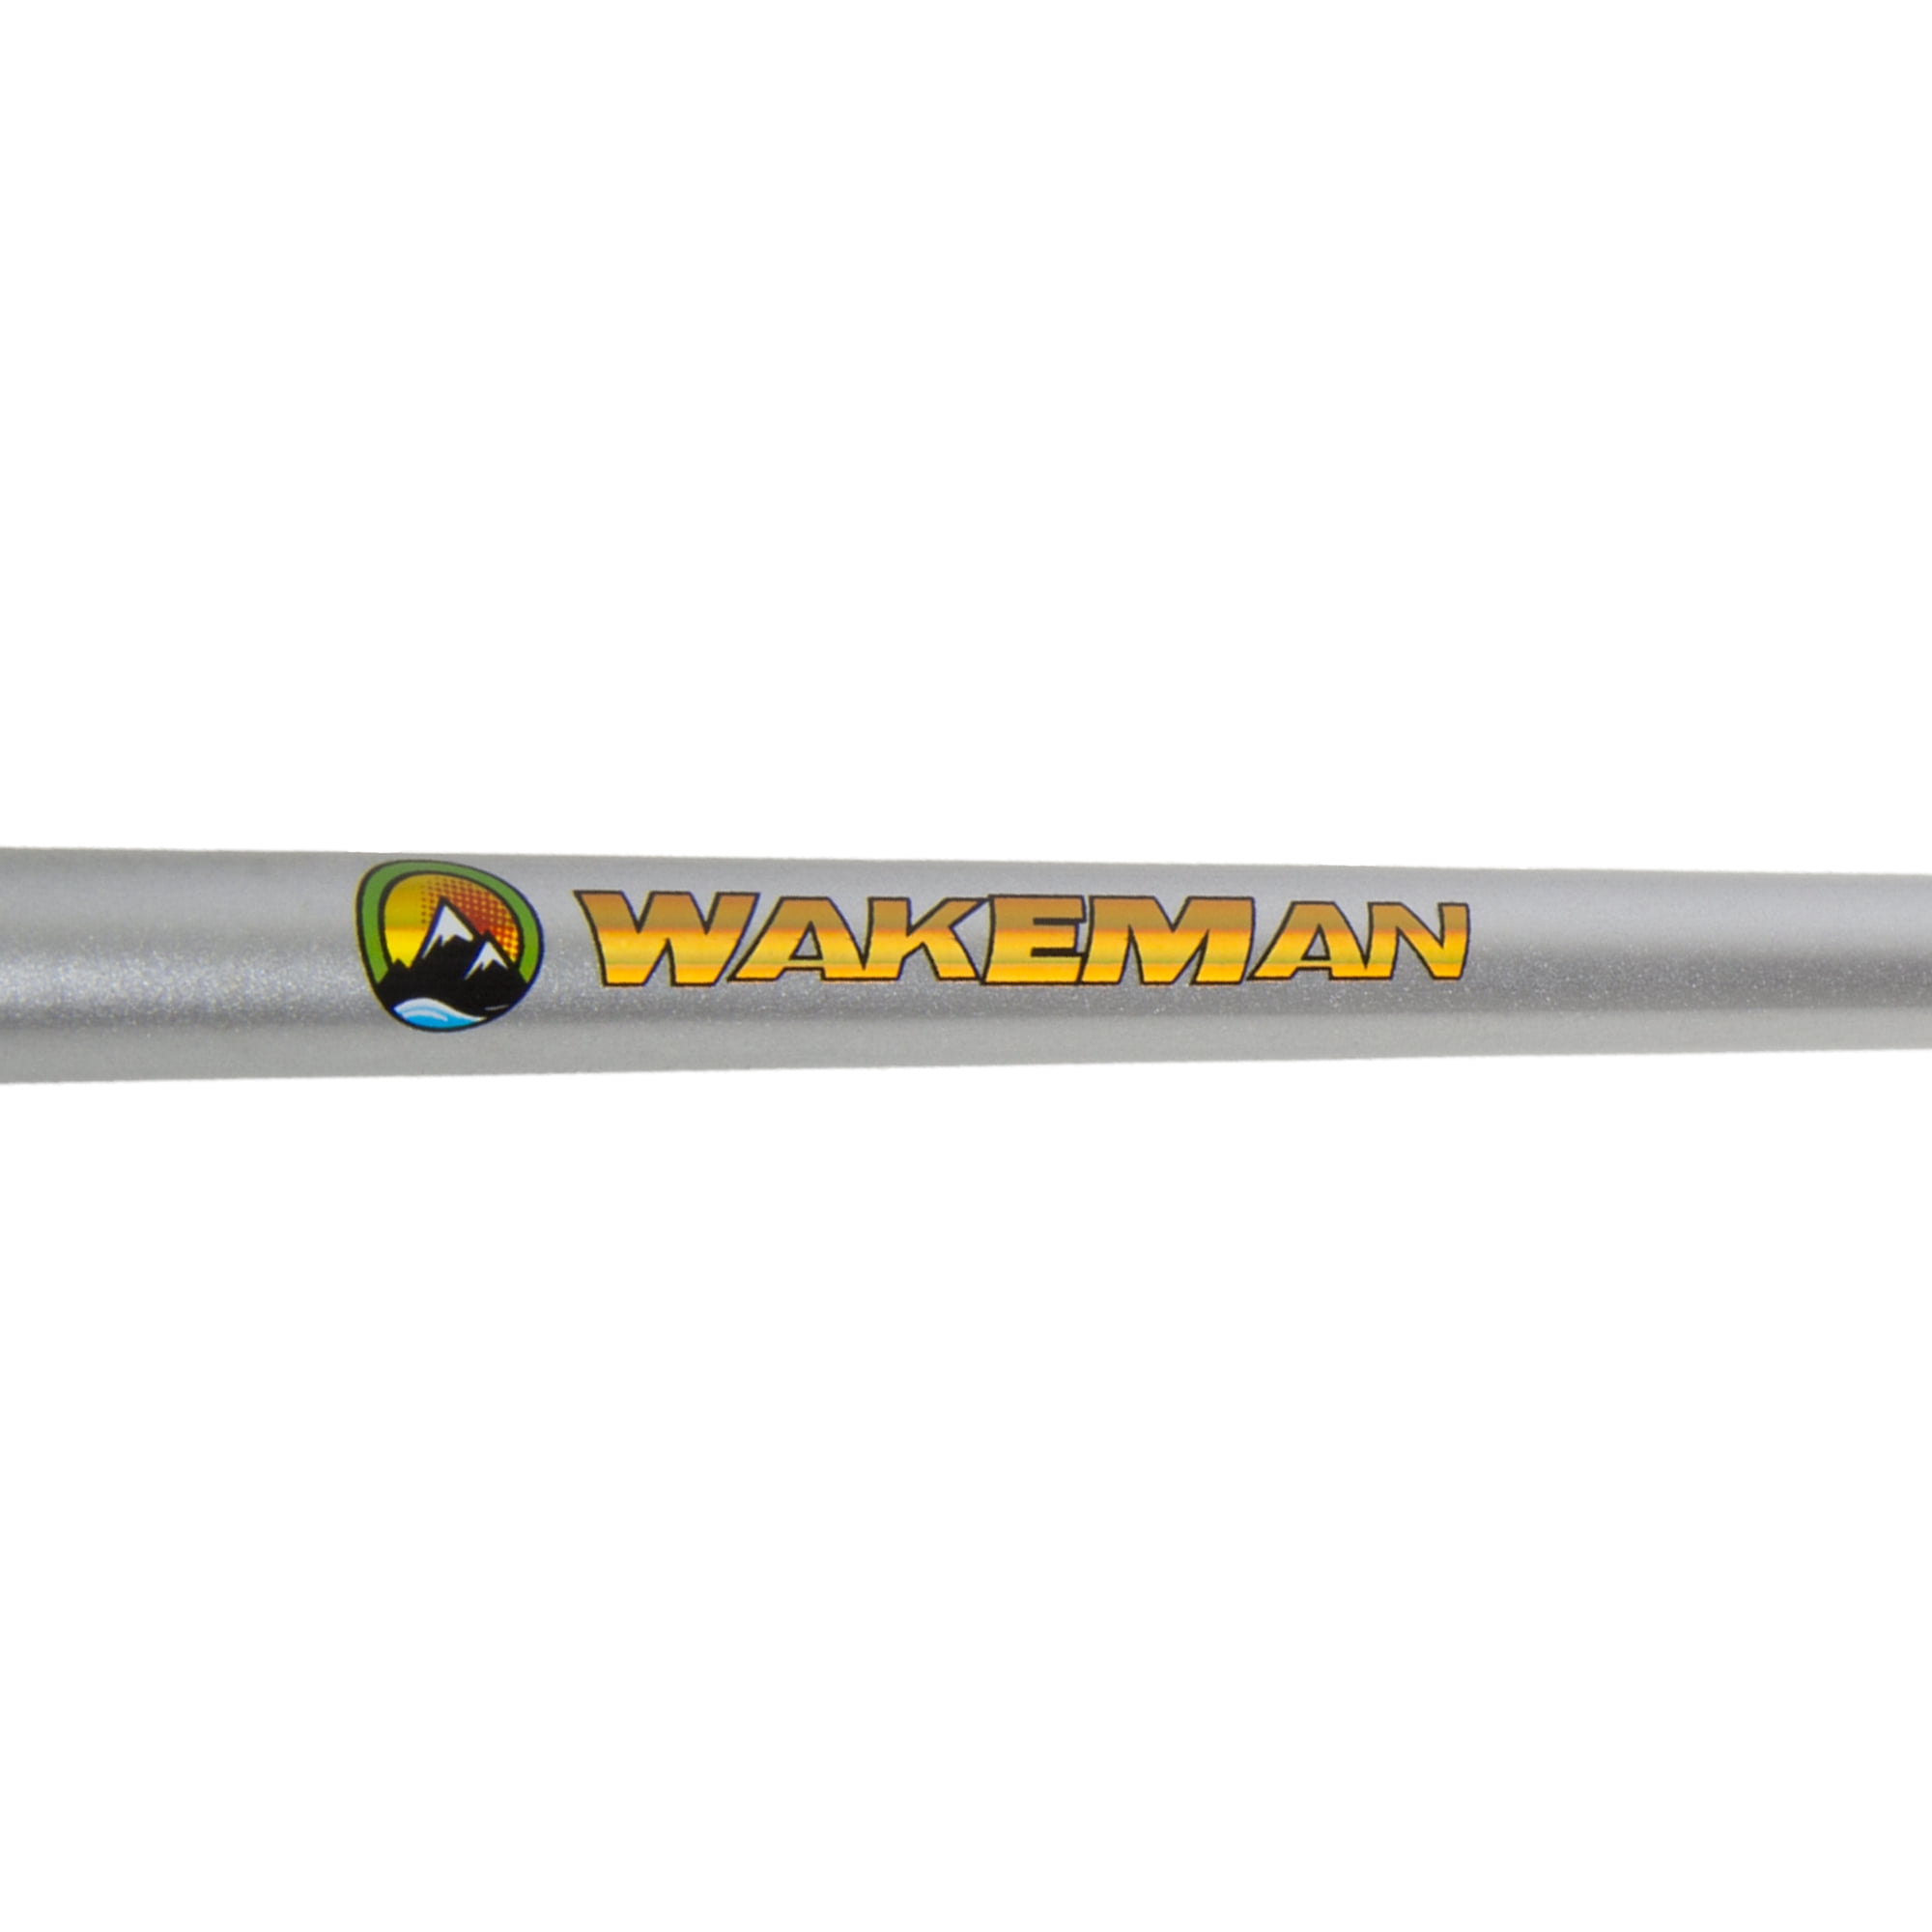  Fishing Rod and Reel Combo - 6.6-Feet Fiberglass Pole and Spinning  Reel with 10lb Line for Pond, Lake, and Shoreline Fishing by Wakeman (Blue)  : Everything Else